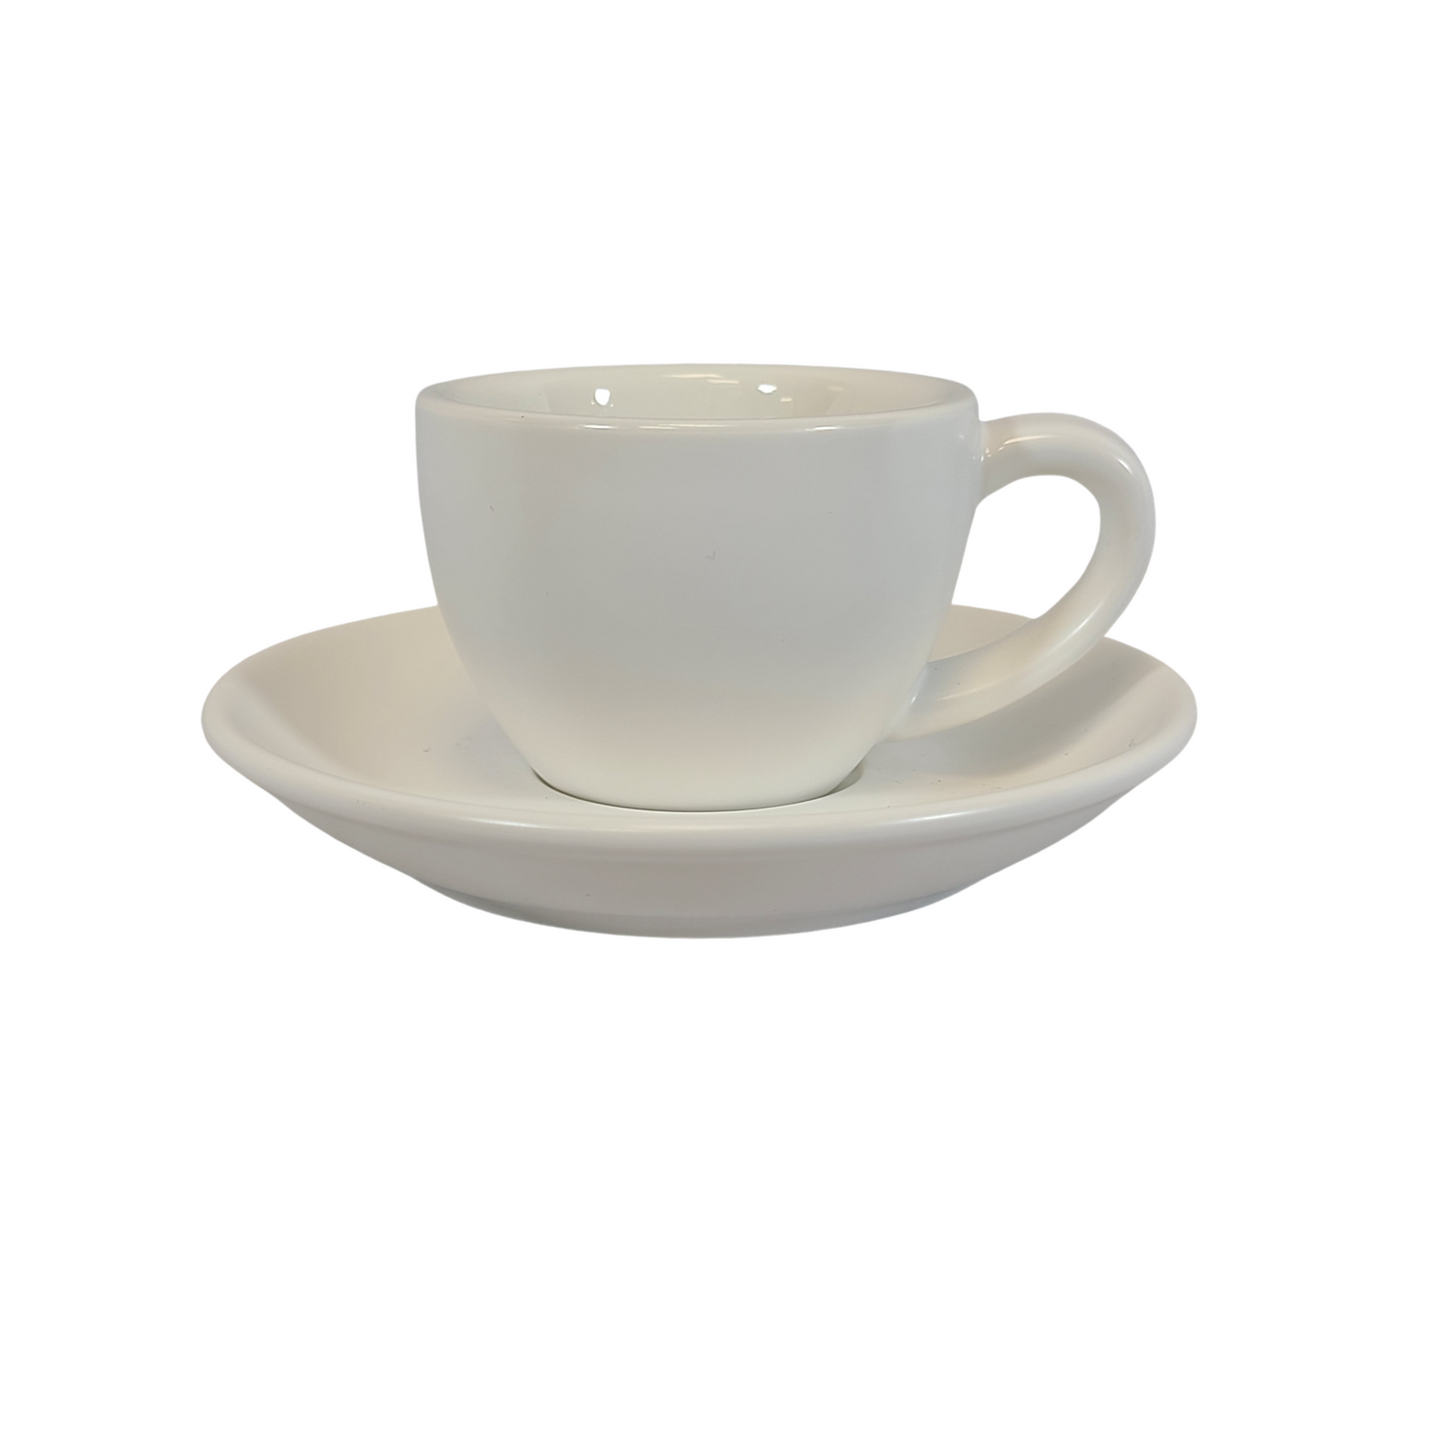 Coffee Addicts commercial ceramic cup with saucer in matte white espresso cup 2.7oz 80ml